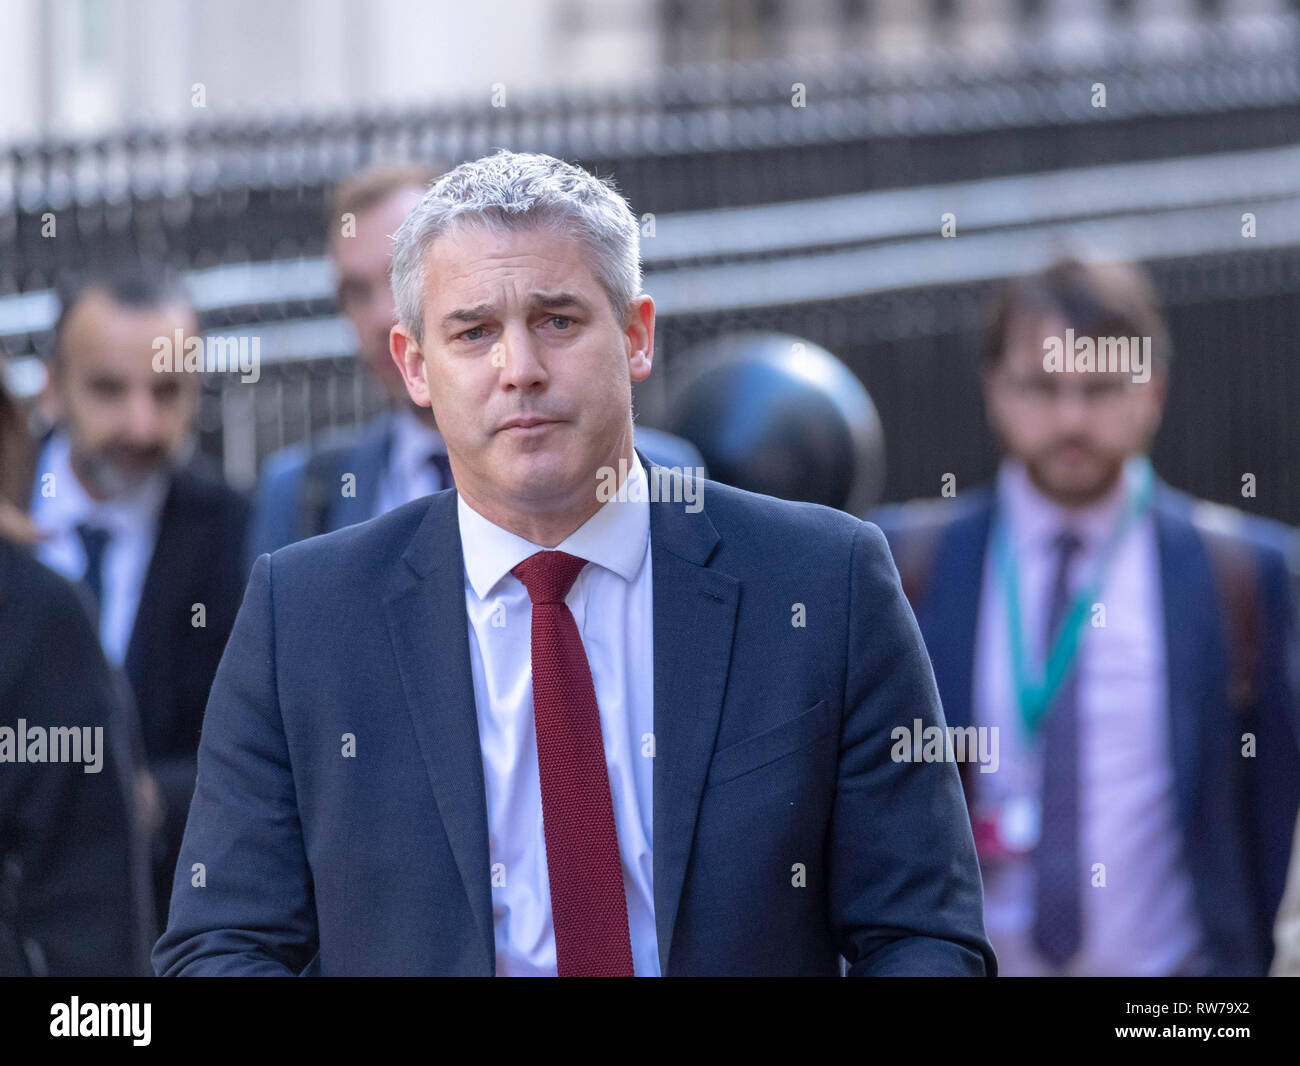 London, UK. 5th March 2019, Stephen Barclay, MP PC, Brexit Secretary and Geoffrey, Attorney General leave Downing Street for the latest round of Brexit negotiations, London, UK. Credit: Ian Davidson/Alamy Live News Stock Photo